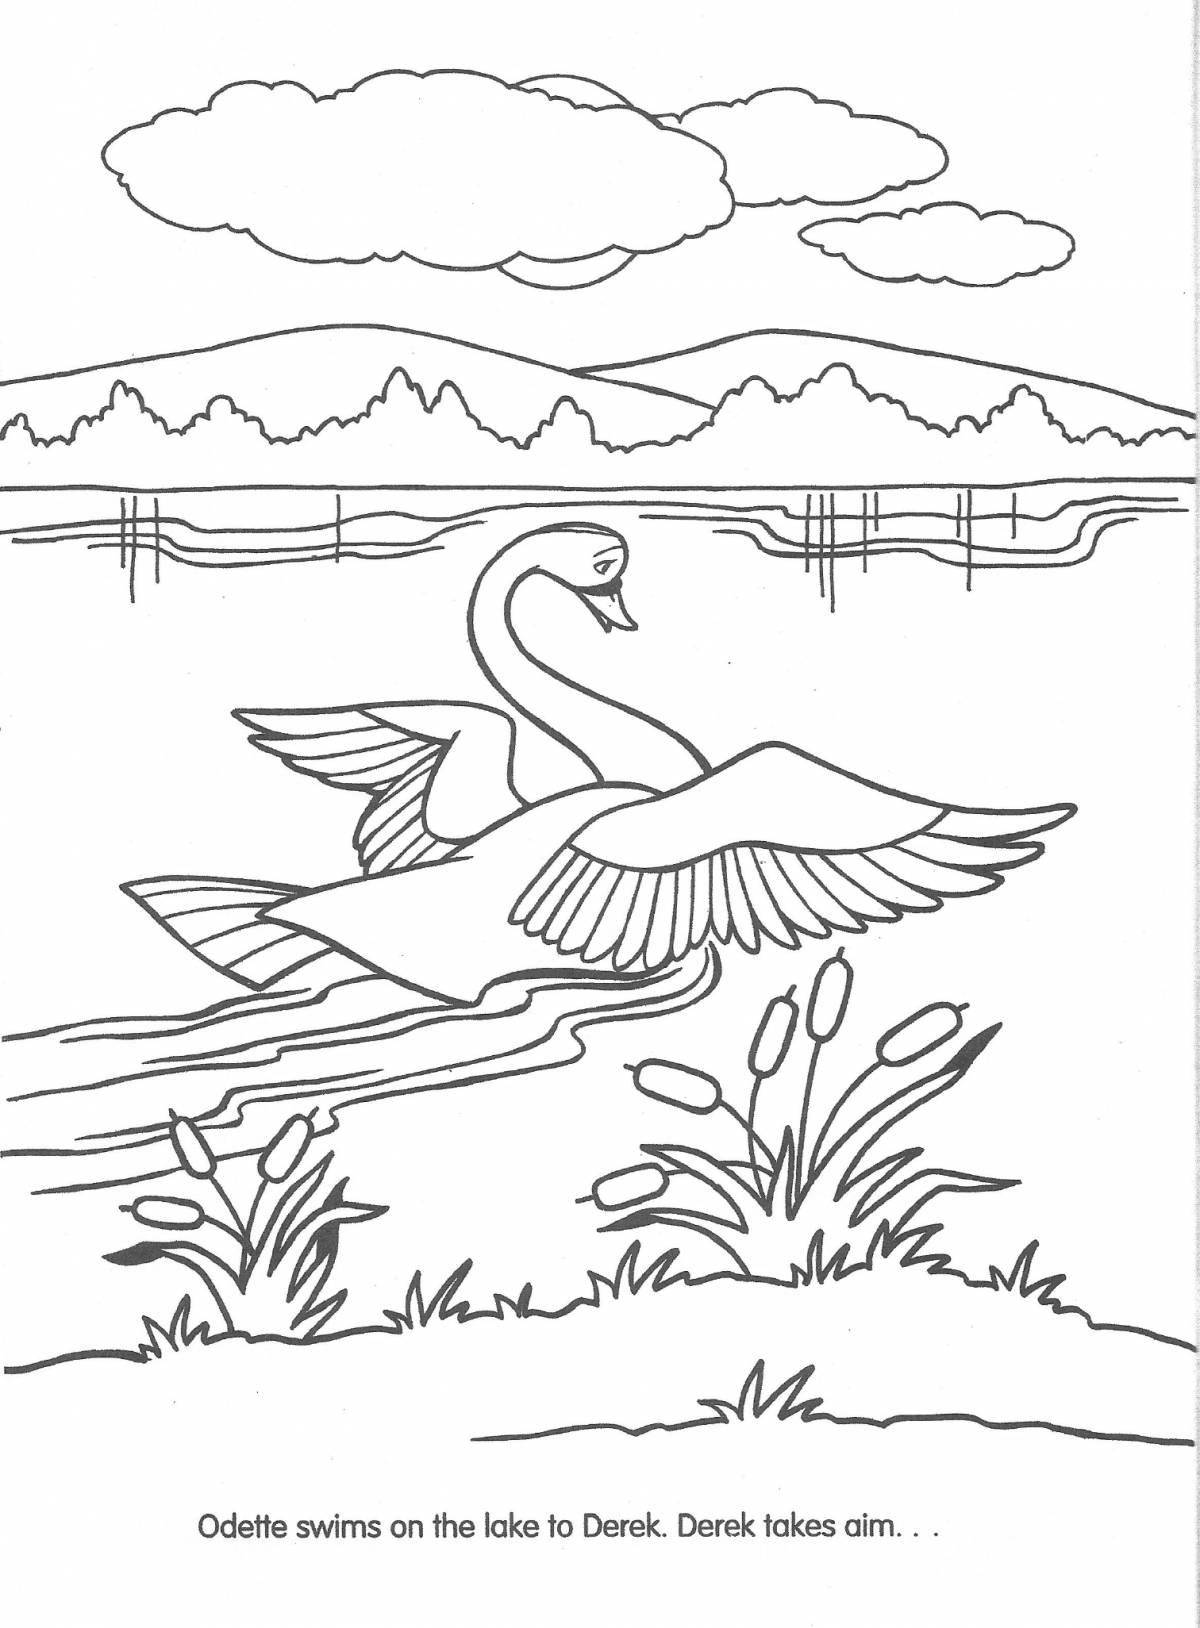 Swan lake live coloring book for beginners